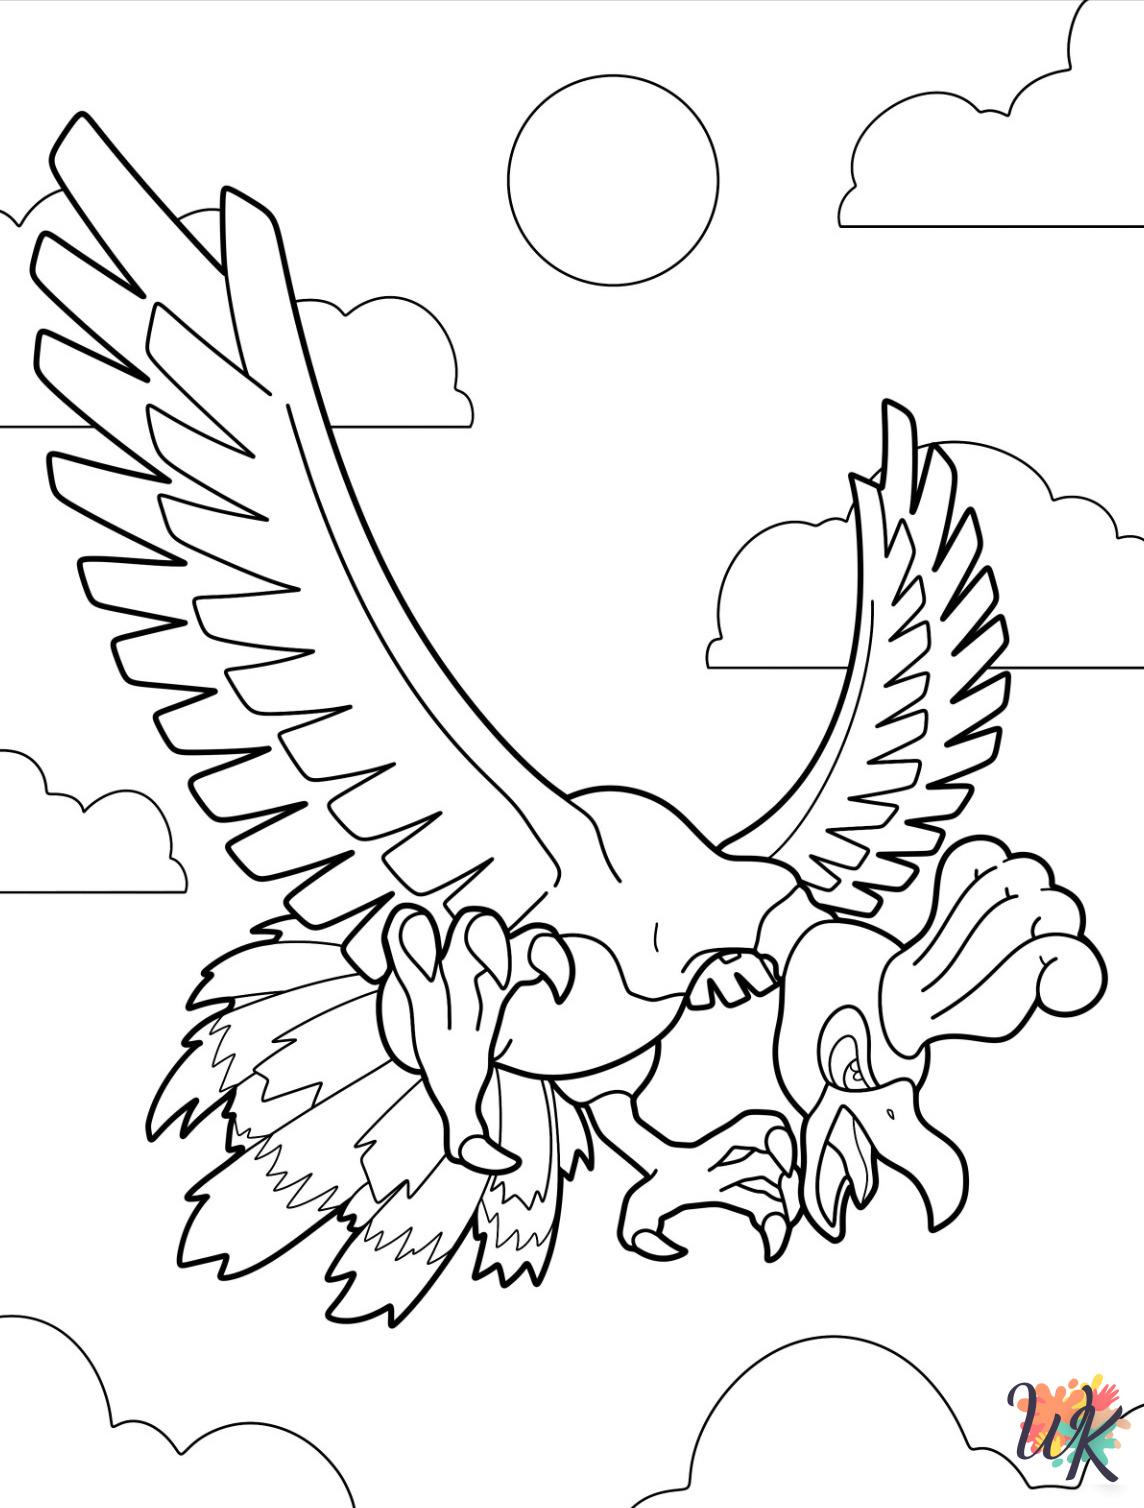 Legendary Pokemon free coloring pages